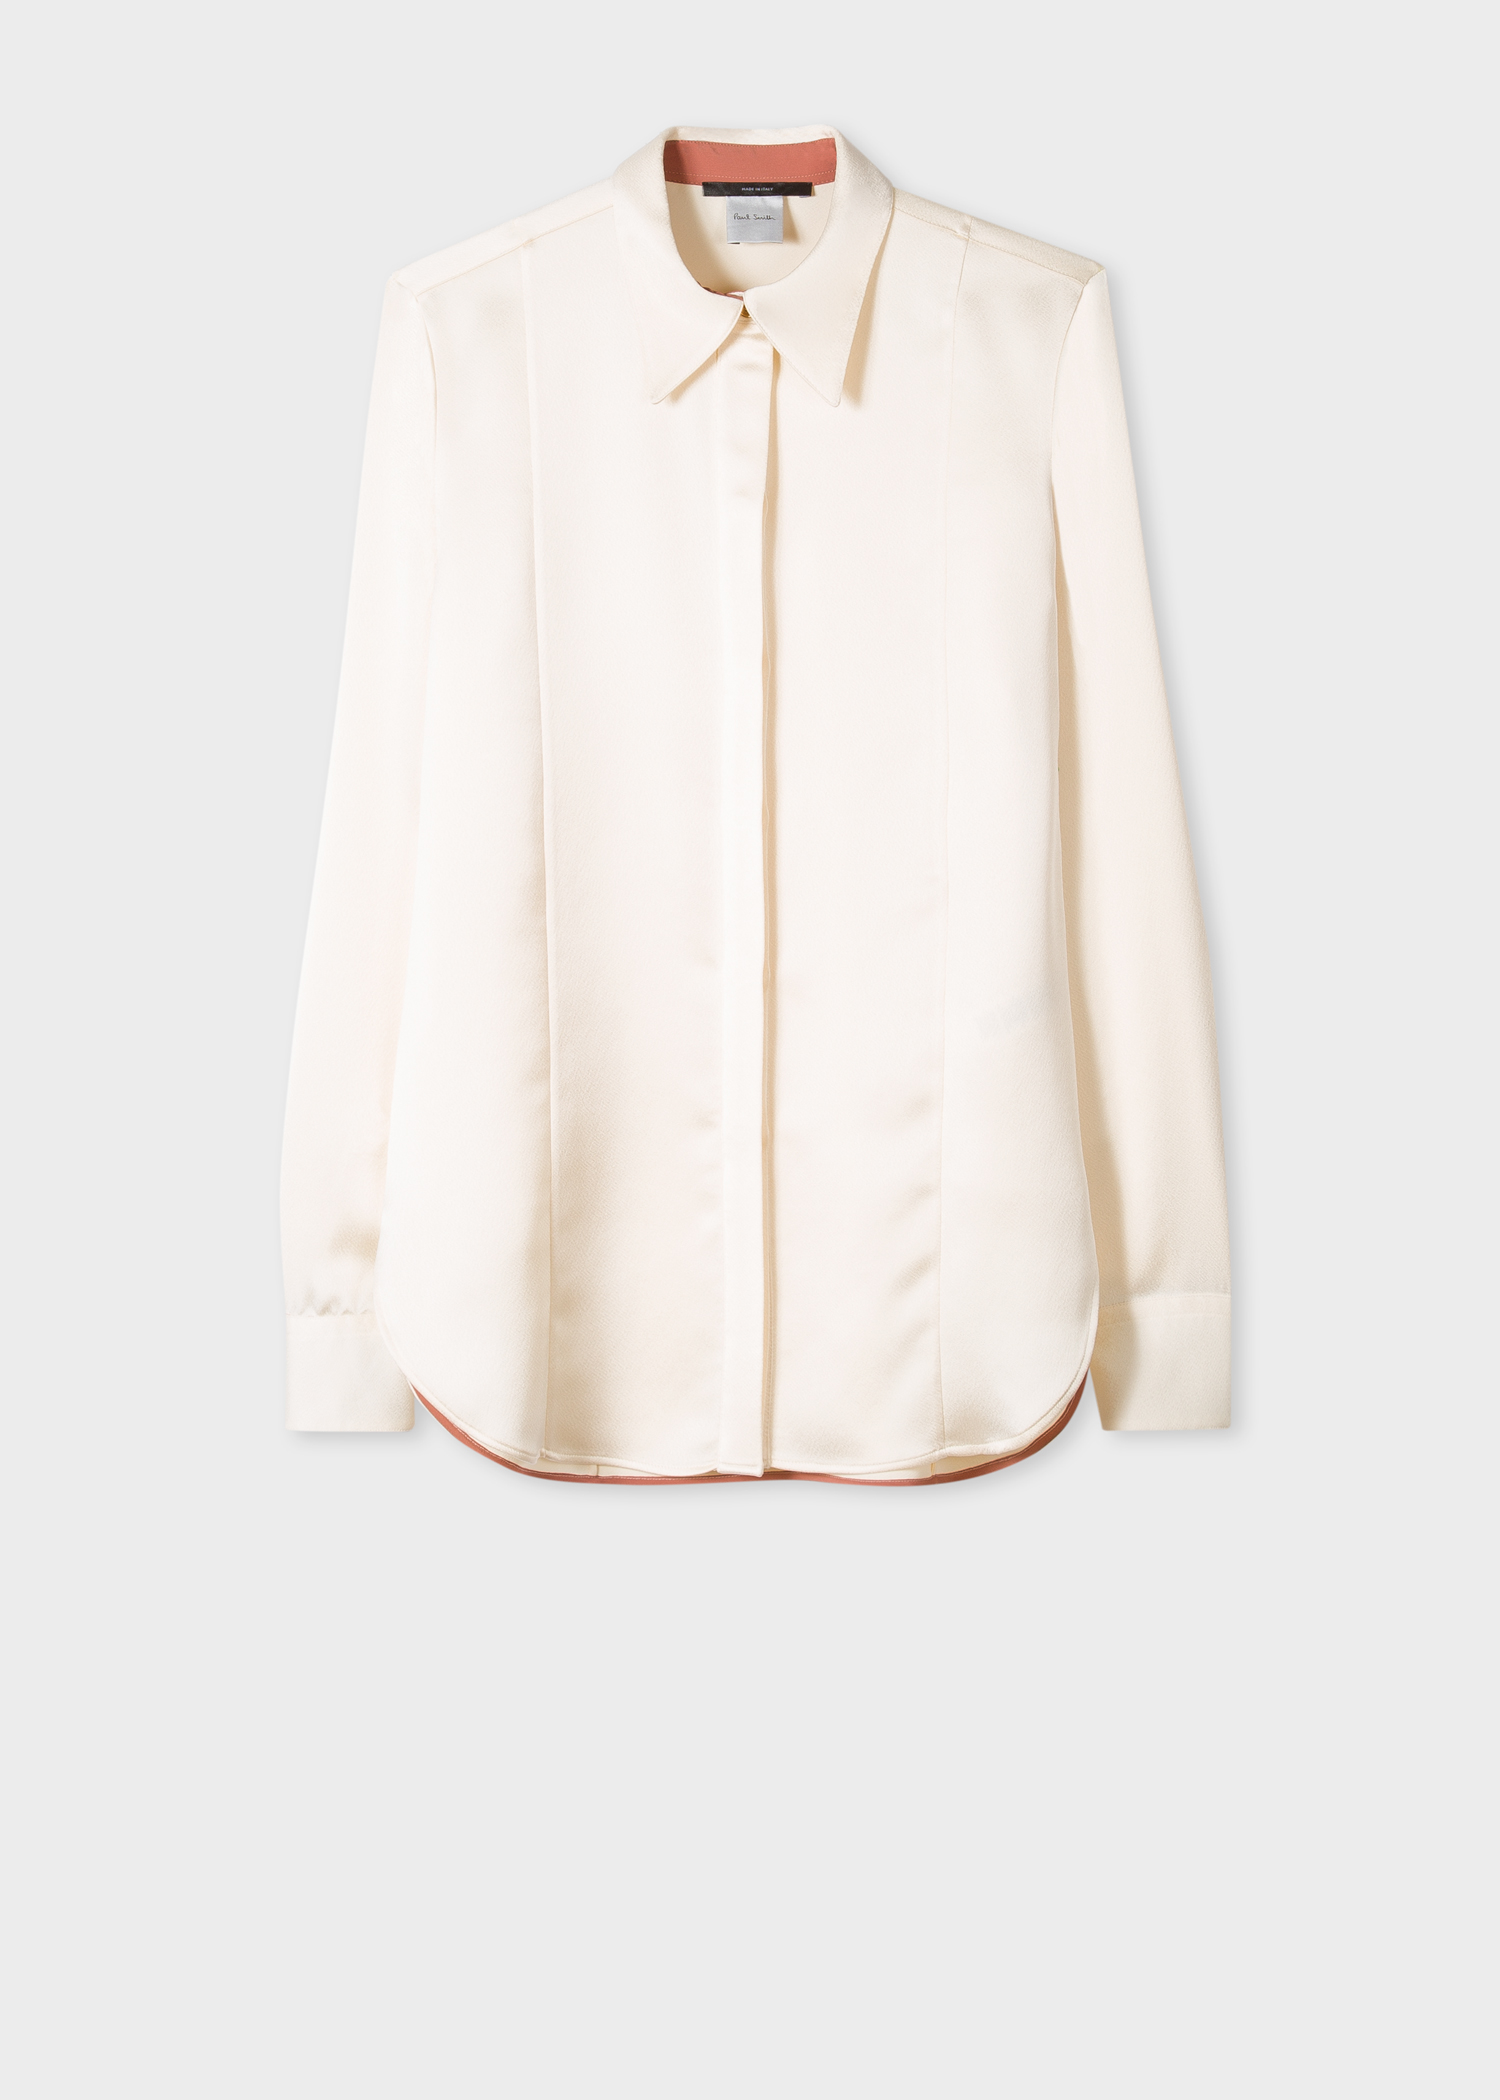 Front view - Women's Cream Satin Shirt With Contrast Details Paul Smith